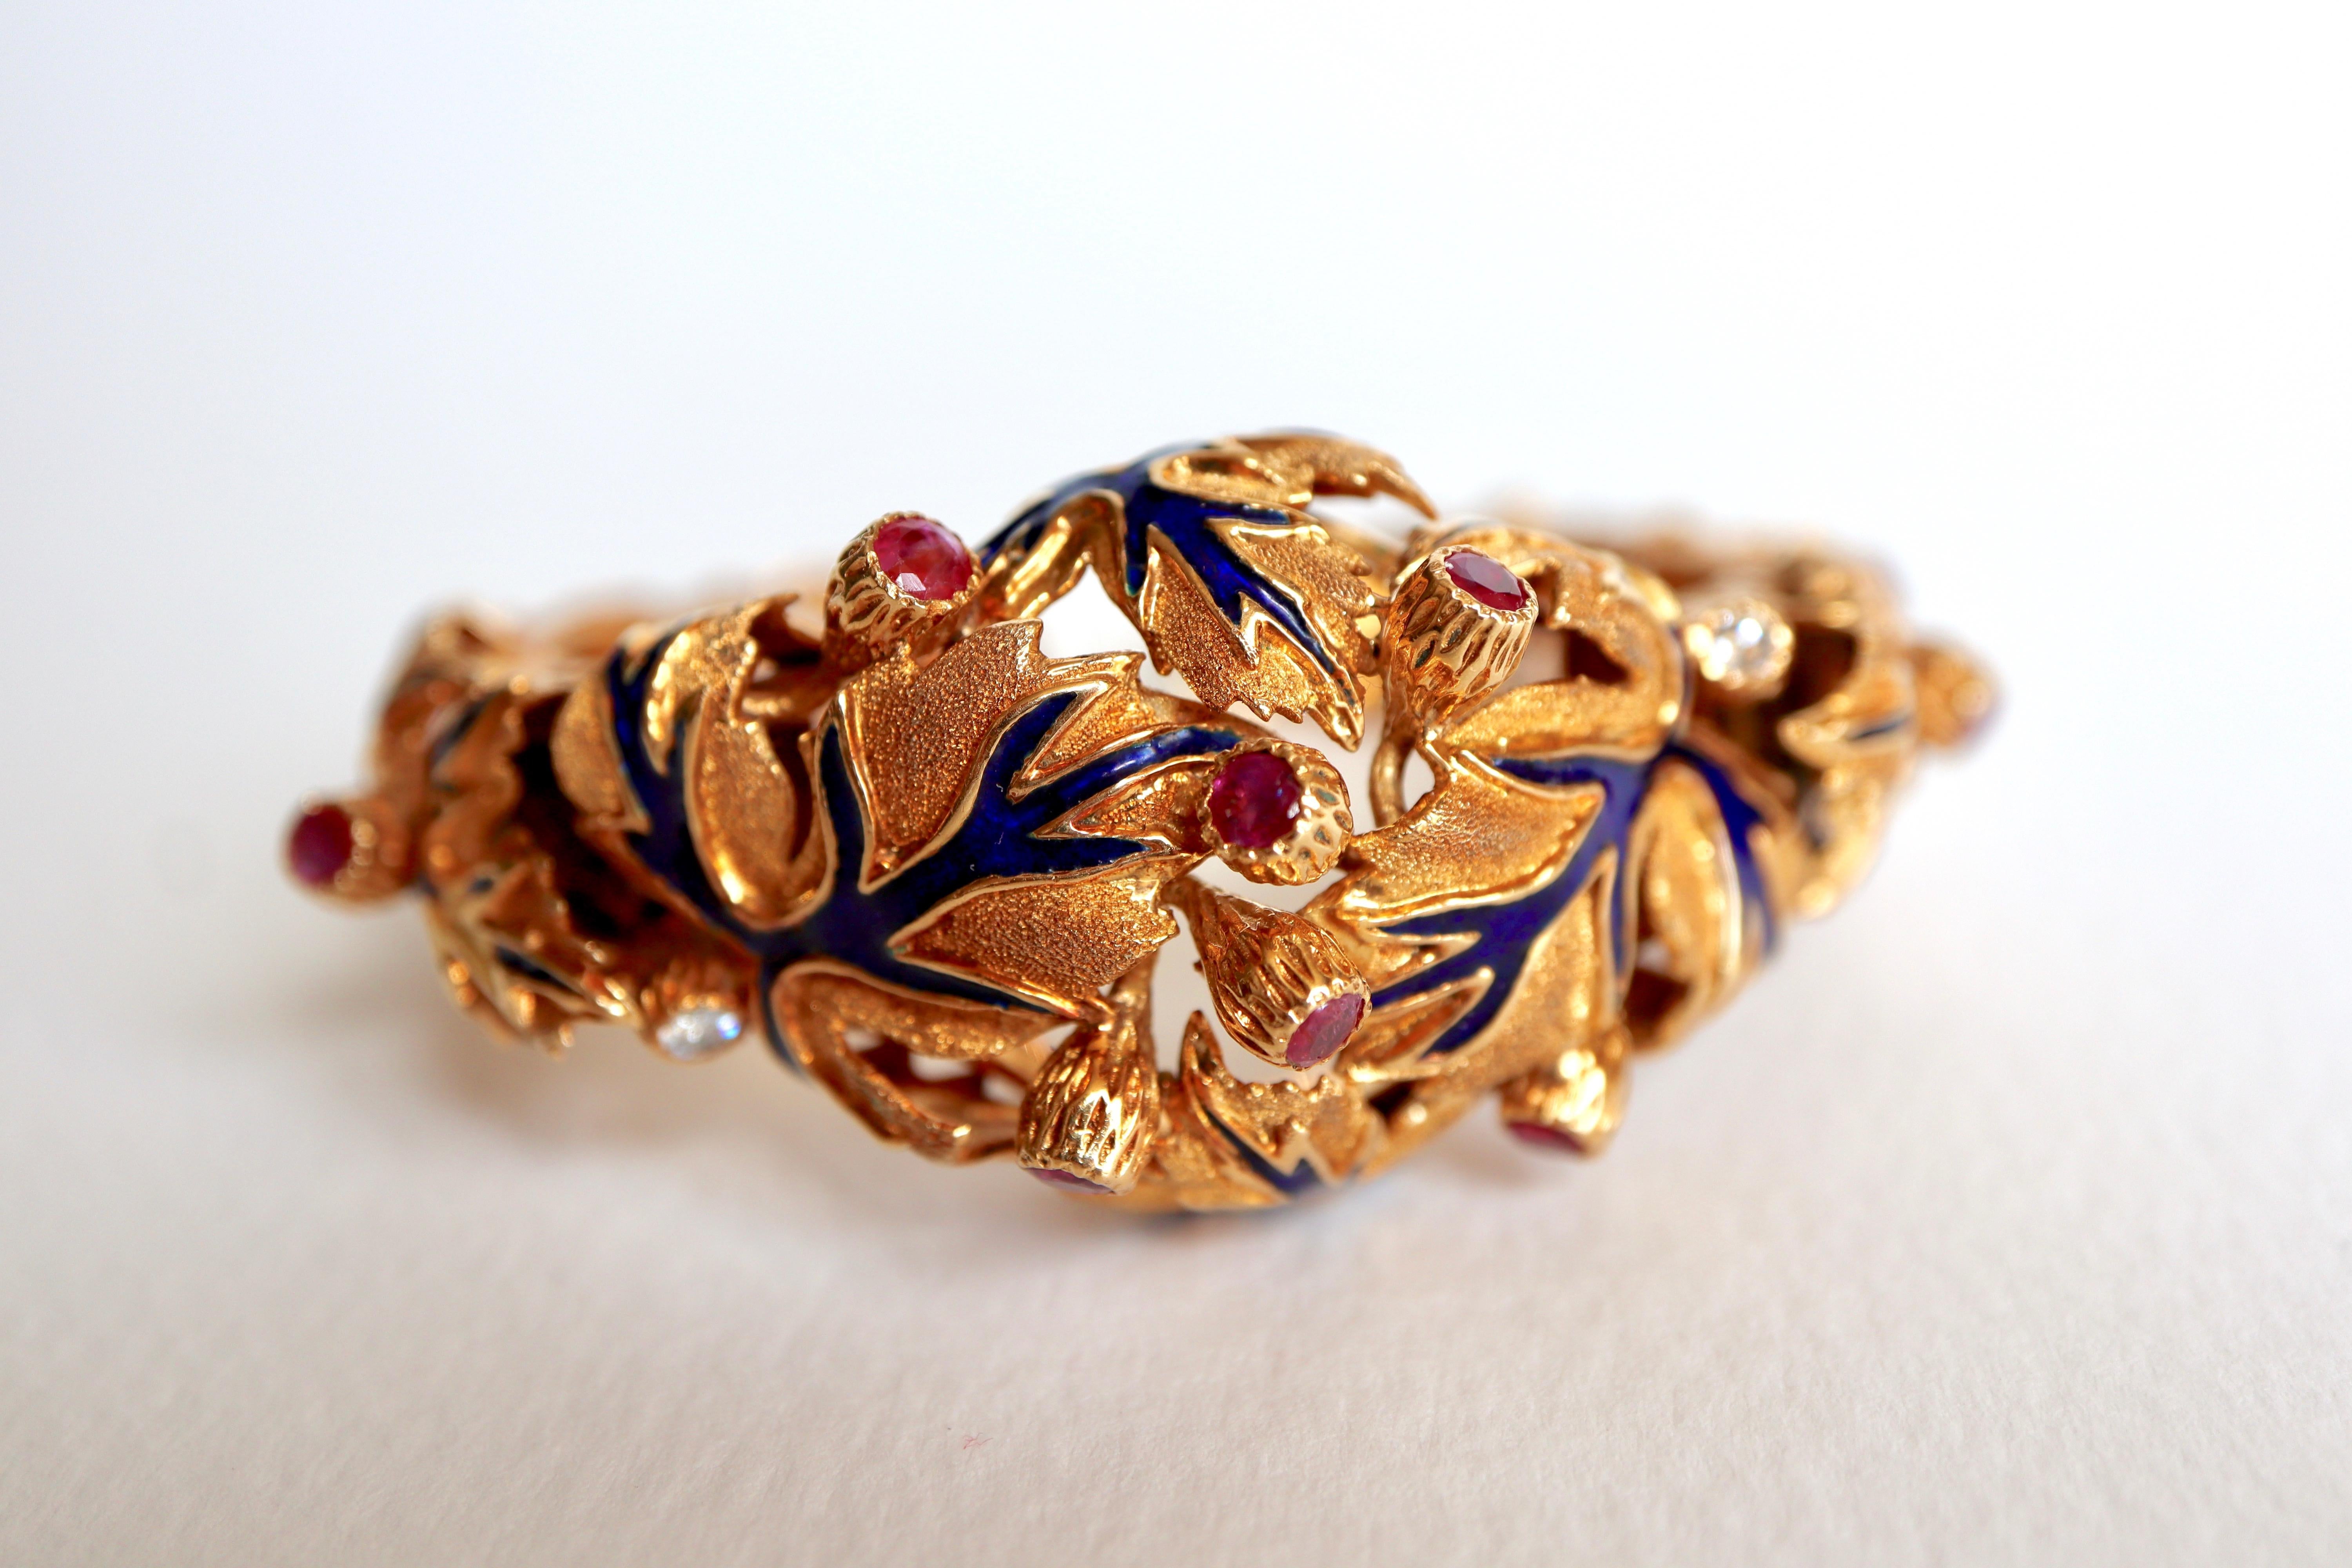 ZOLOTAS Bracelet in chiseled 18 kt yellow gold highlighted with blue enamel leaves motif punctuated with flower buds set with rubies and diamonds. The bracelet is hinged in two places with a spring mechanism allowing it to be worn on the